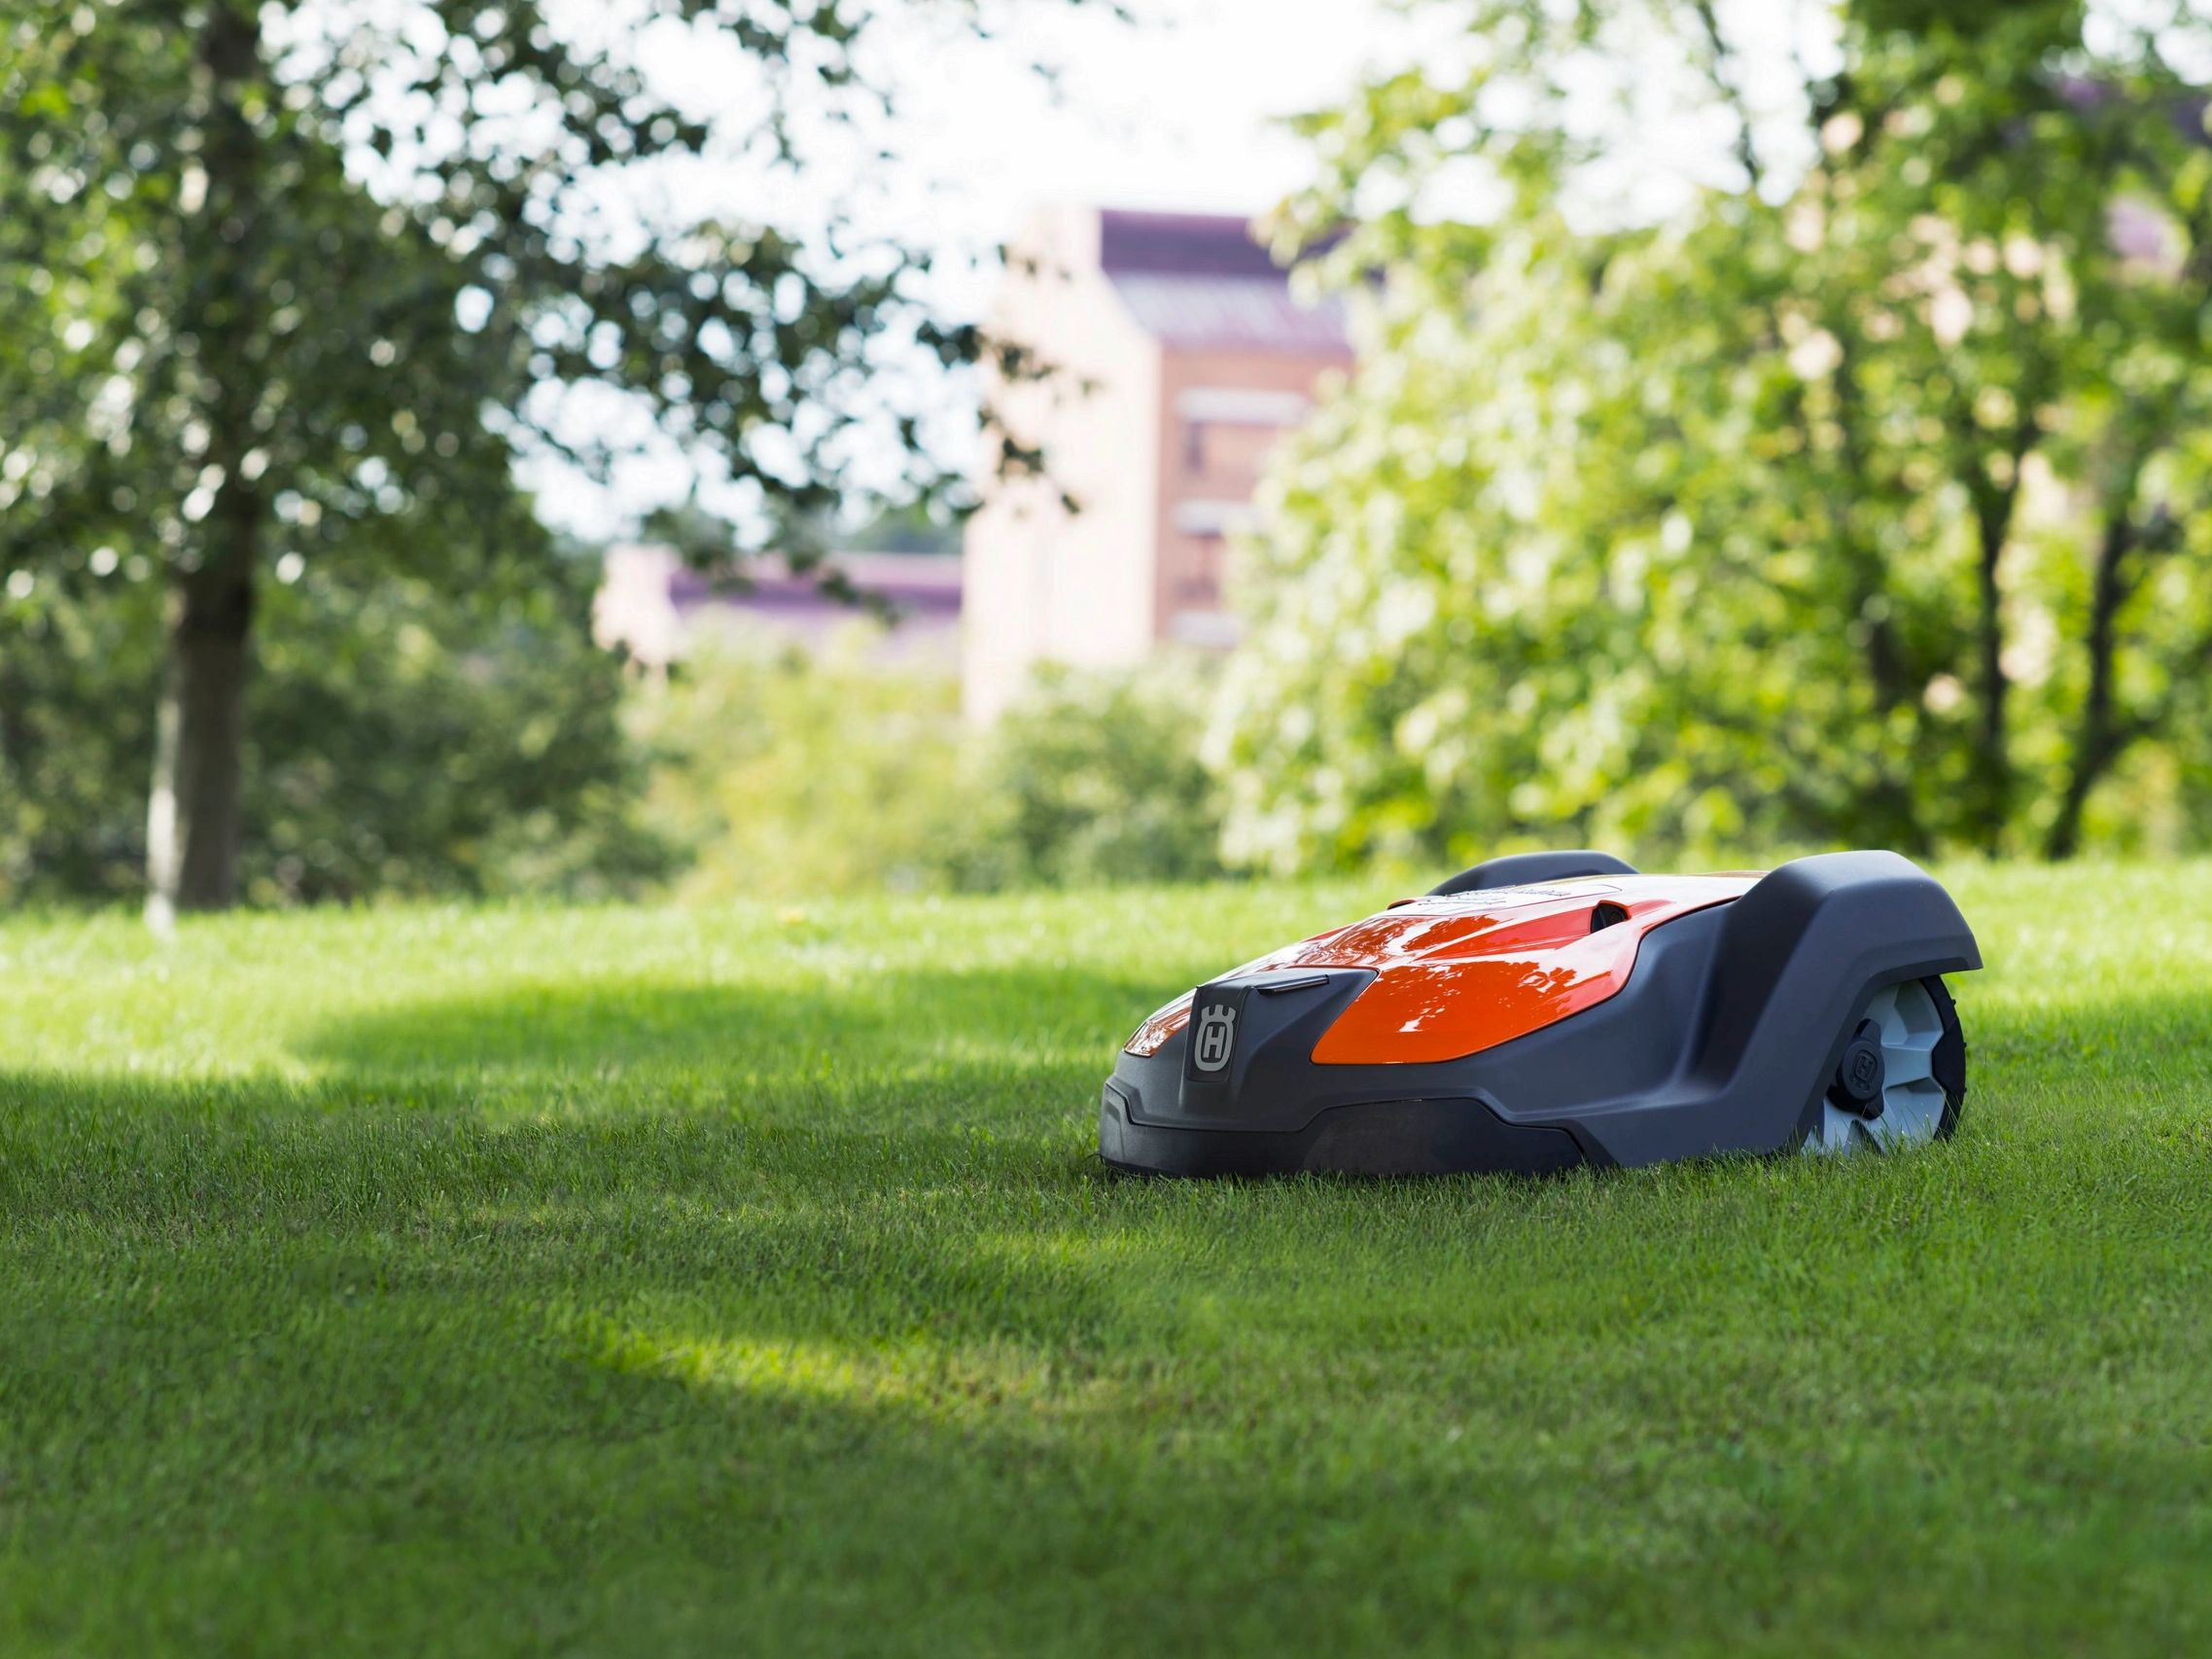 An Automower providing lawn care service and keeping the grass perfectly green